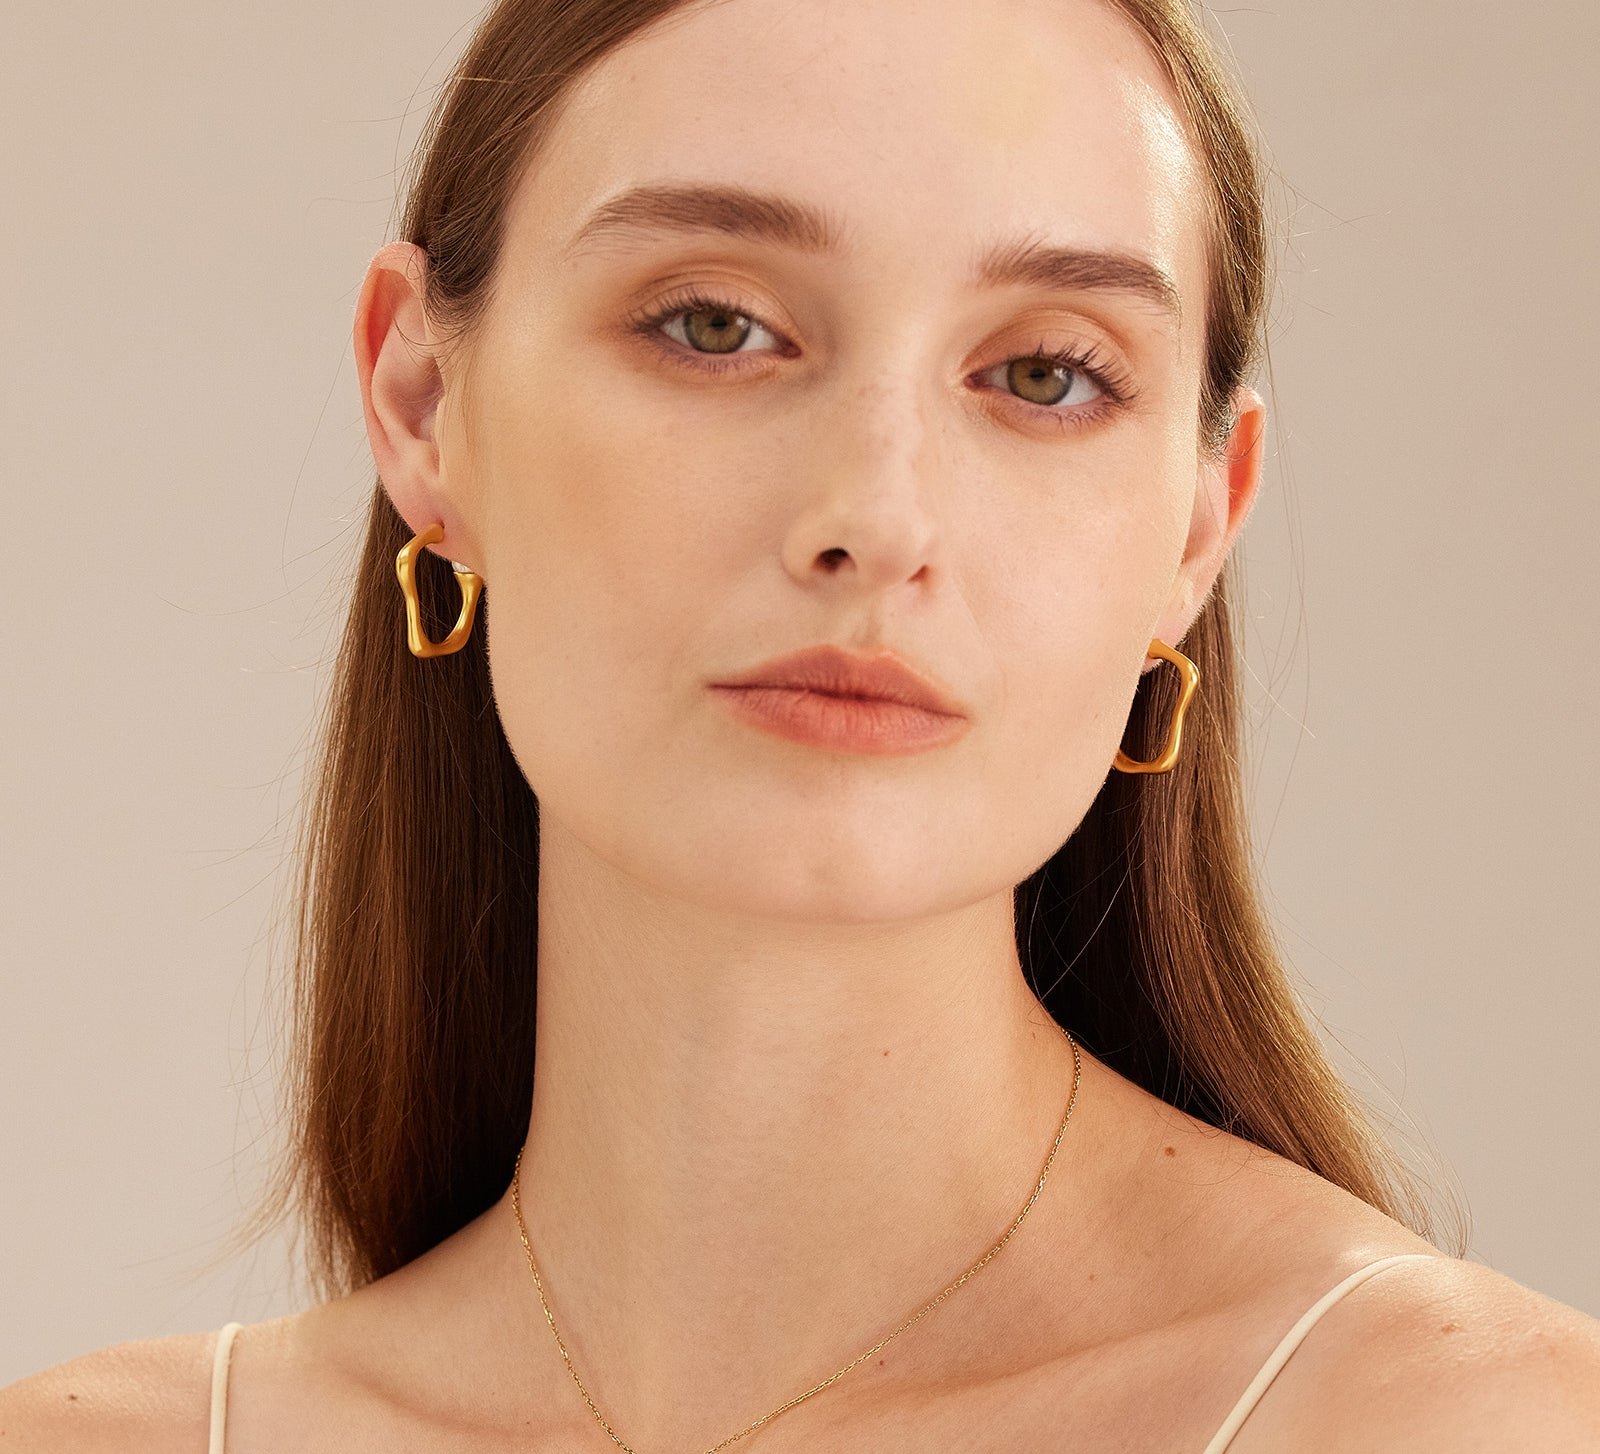 Squiggle Wavy Large Hoop Earrings, a glamorous and stylish accessory that adds a playful twist to the classic hoop design.